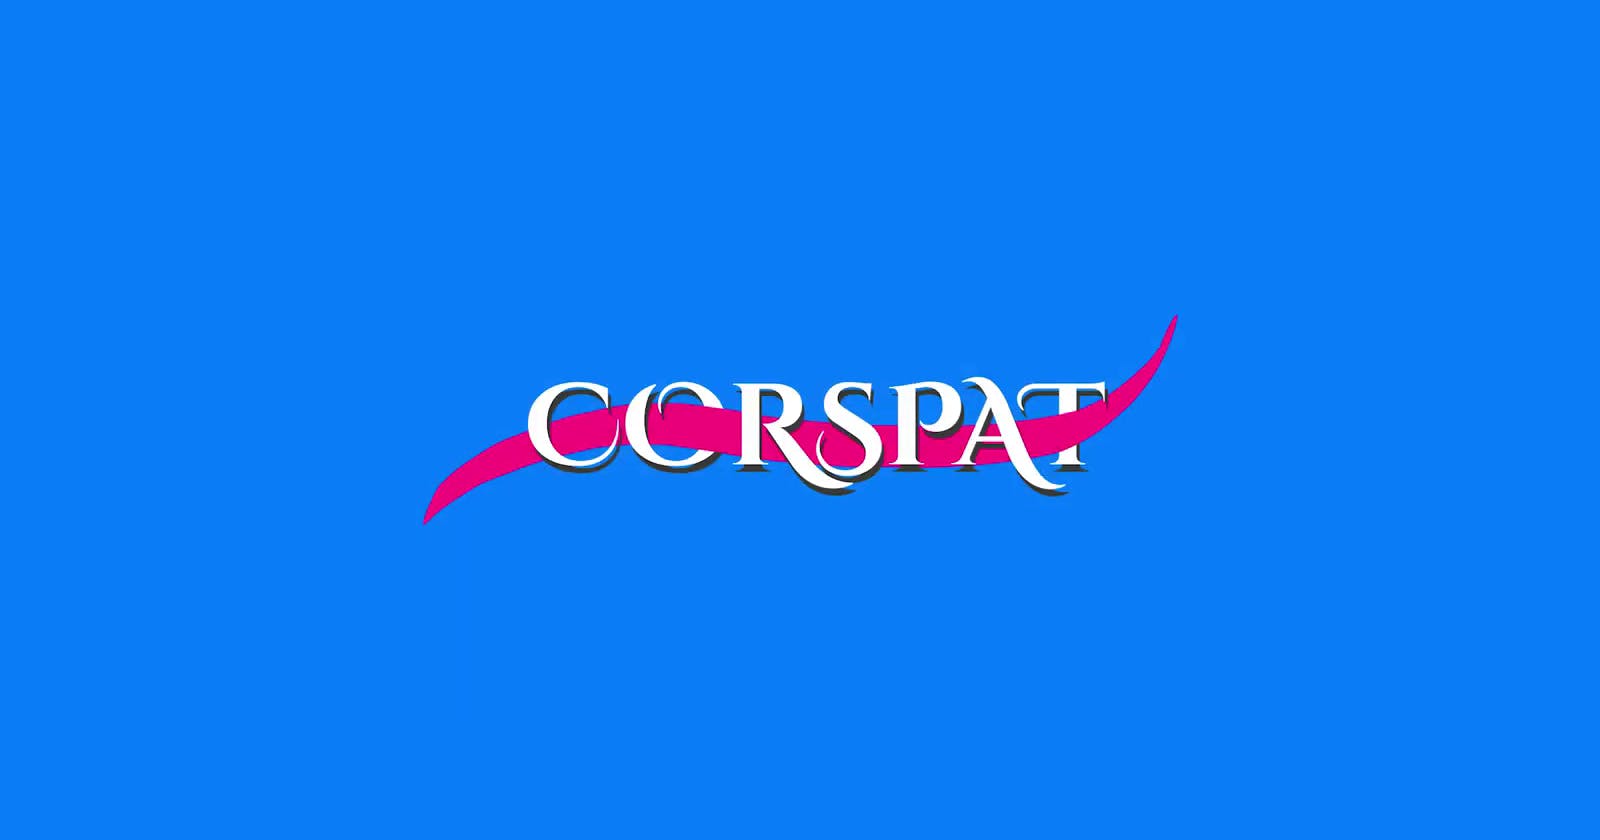 Corspat: Build Your Own Path